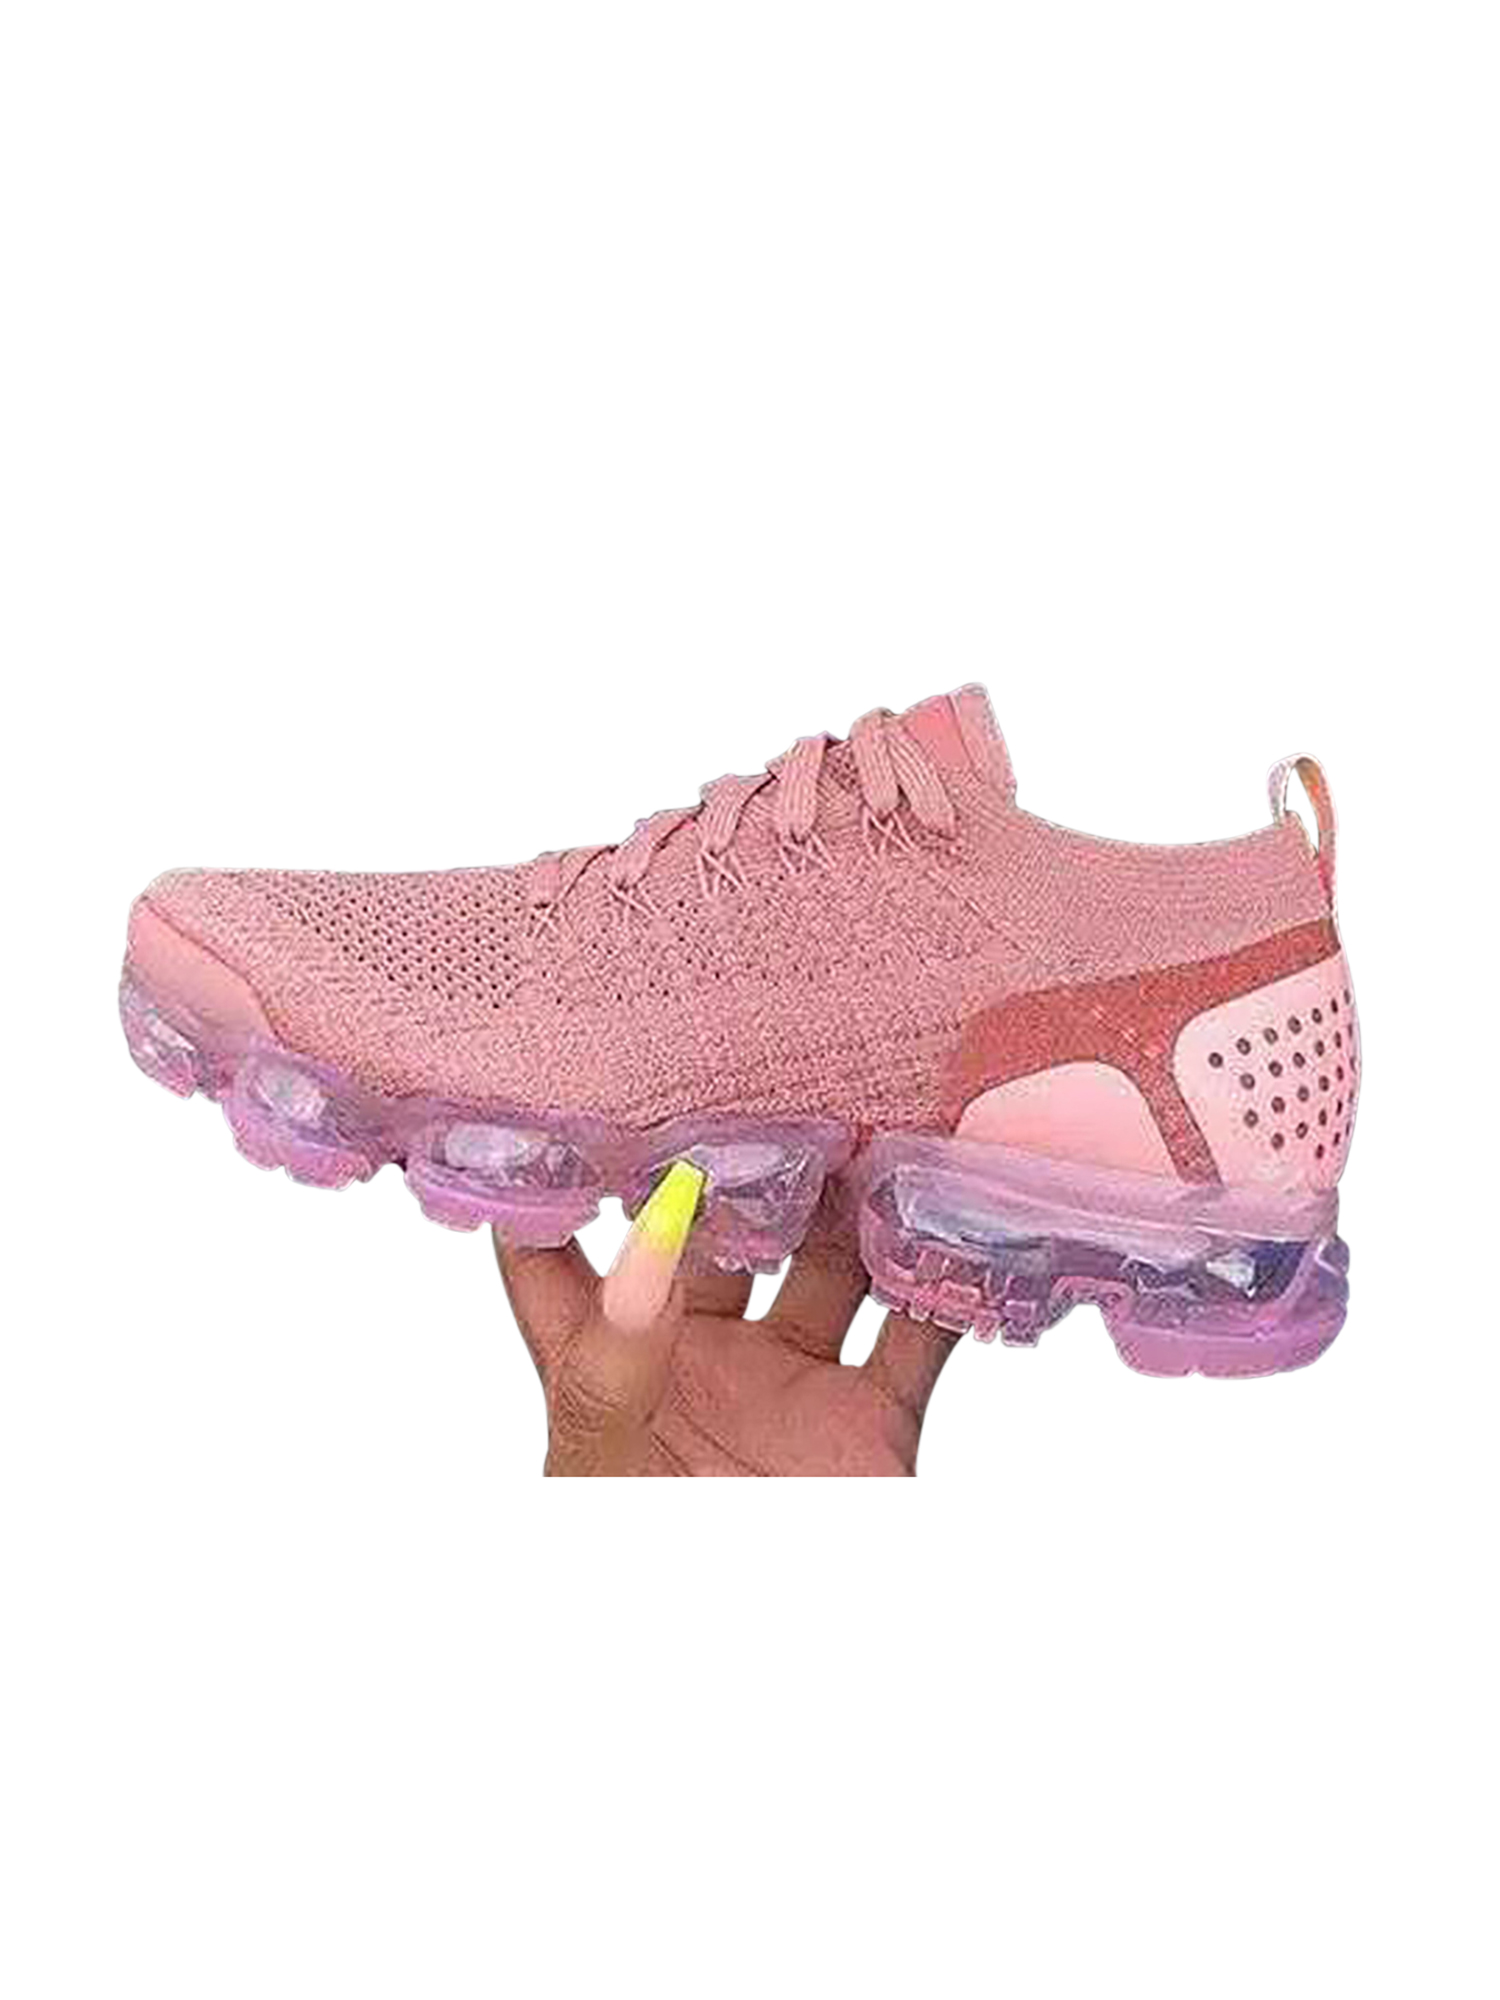 Details about  / Women Lightweight Running Jogging Sneaker Shoes Breathable Mesh Athletic Sport B